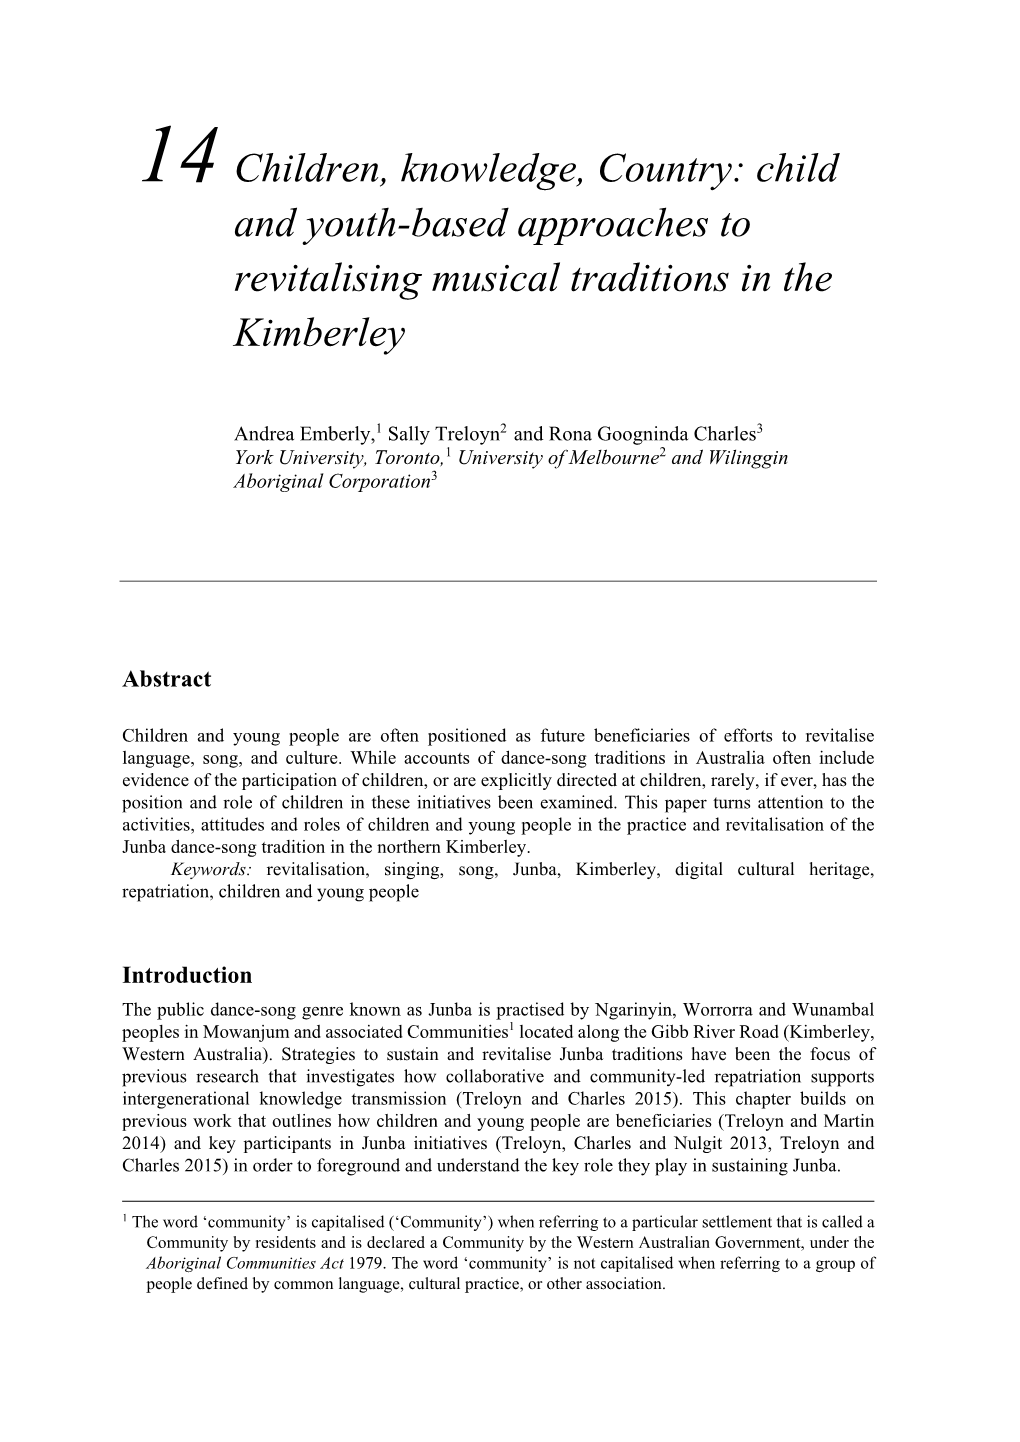 Child and Youth-Based Approaches to Revitalising Musical Traditions in the Kimberley